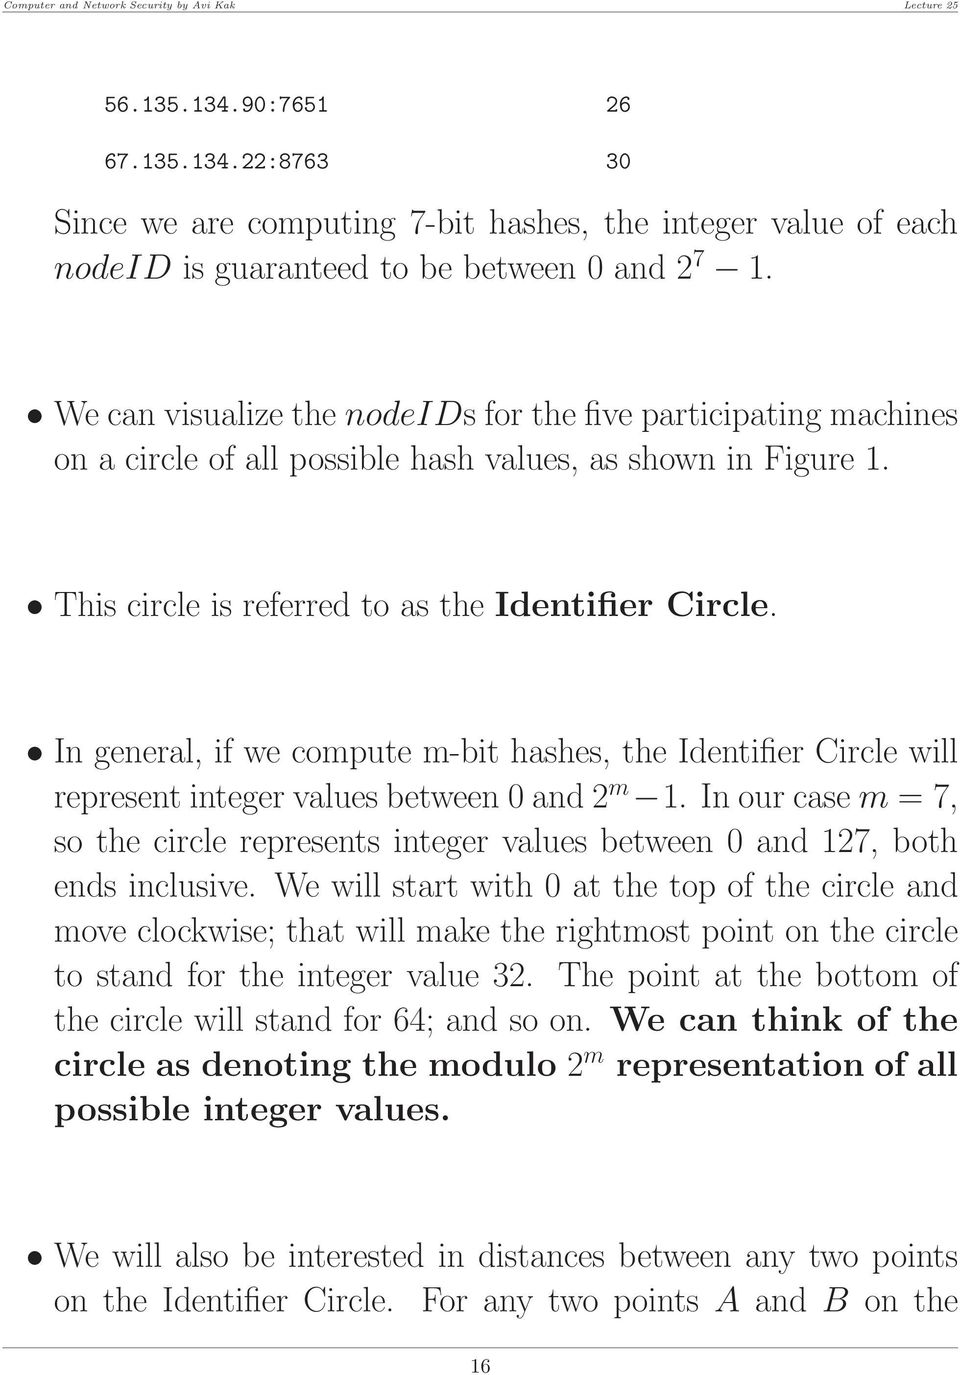 In general, if we compute m-bit hashes, the Identifier Circle will representintegervaluesbetween0and2 m 1.